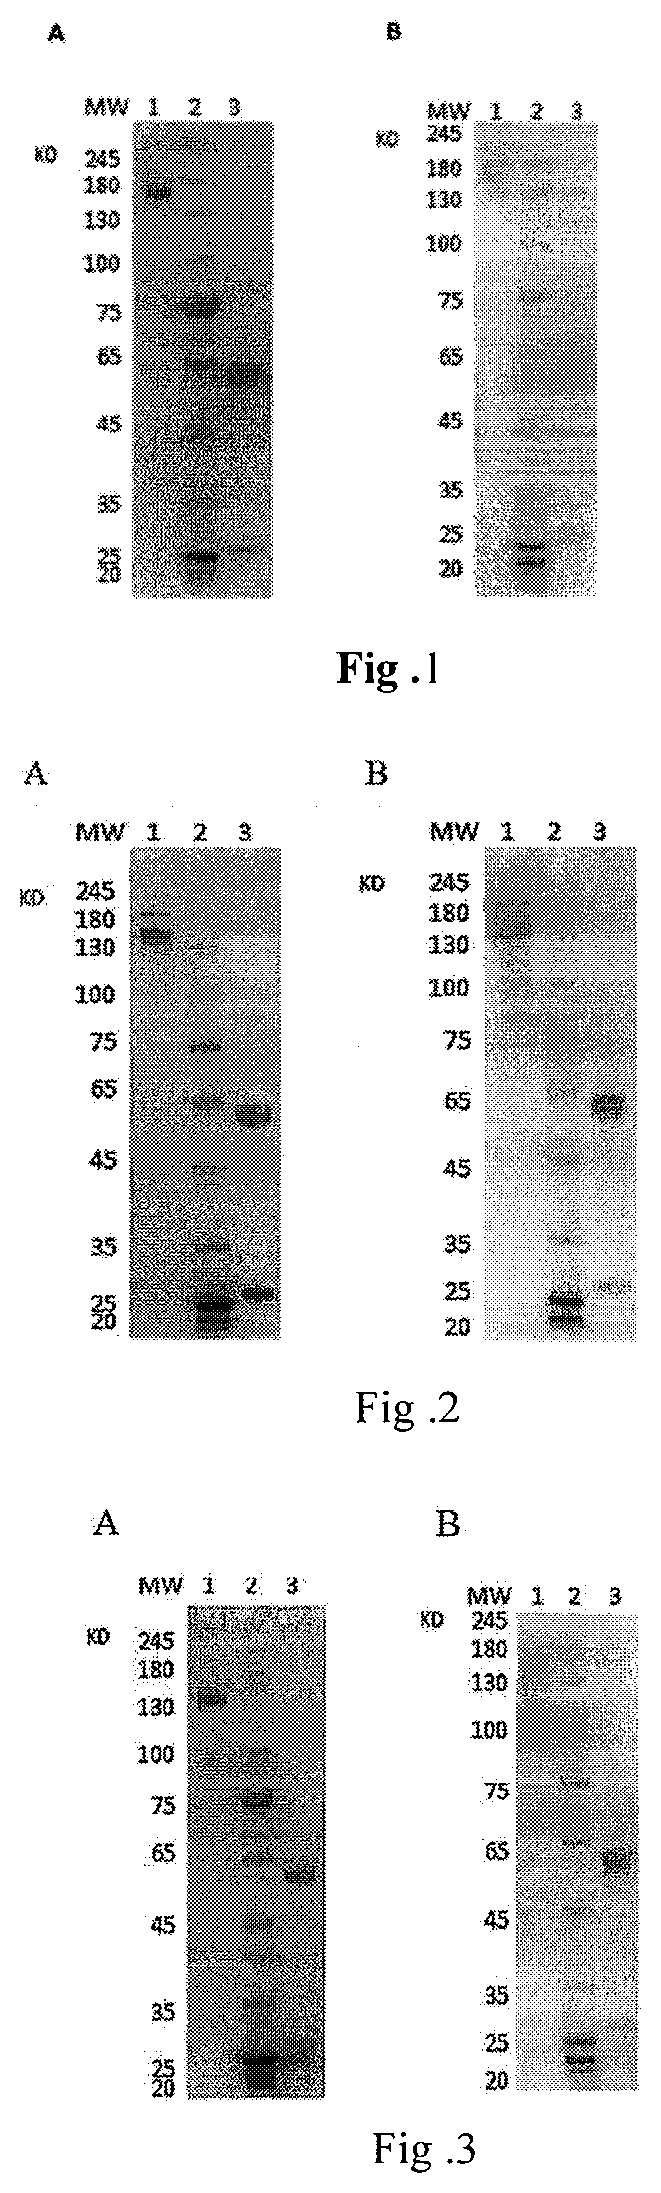 A fully native human neutralizing monoclonal antibody against tetanus toxin and its applications